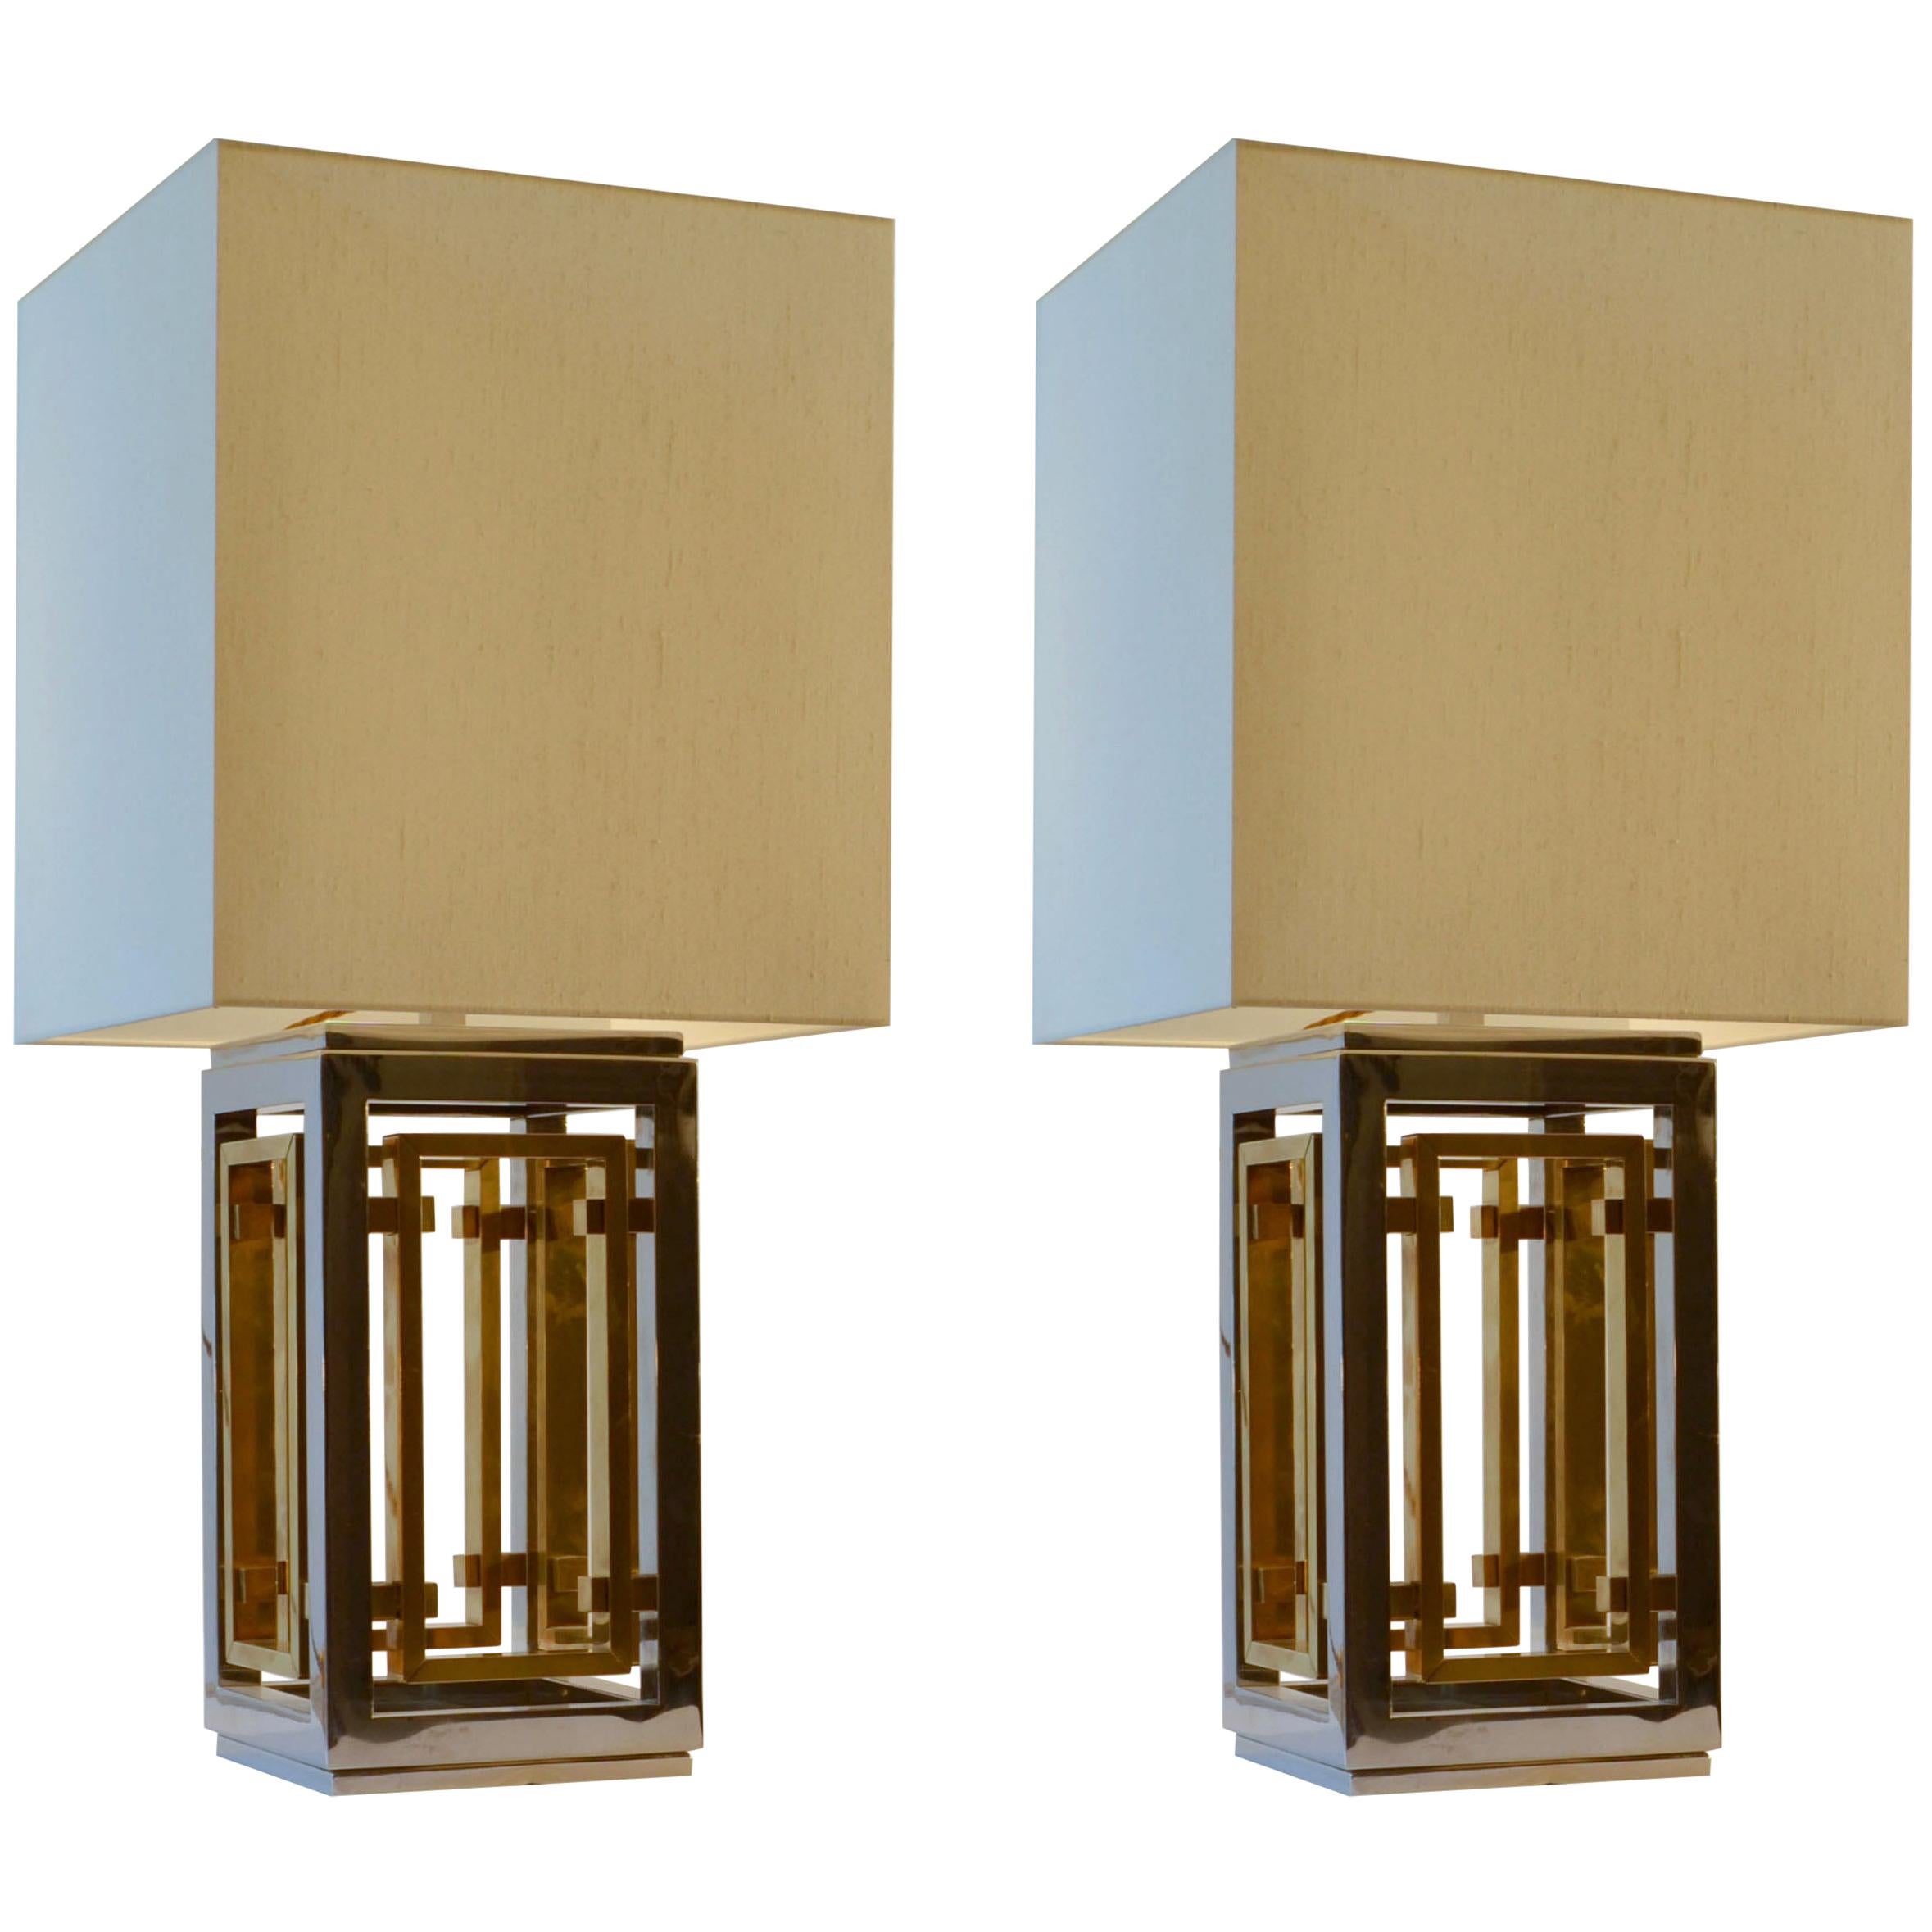 Romeo Rega Pair of Table Lamps, Chrome and Brass with Square Shades